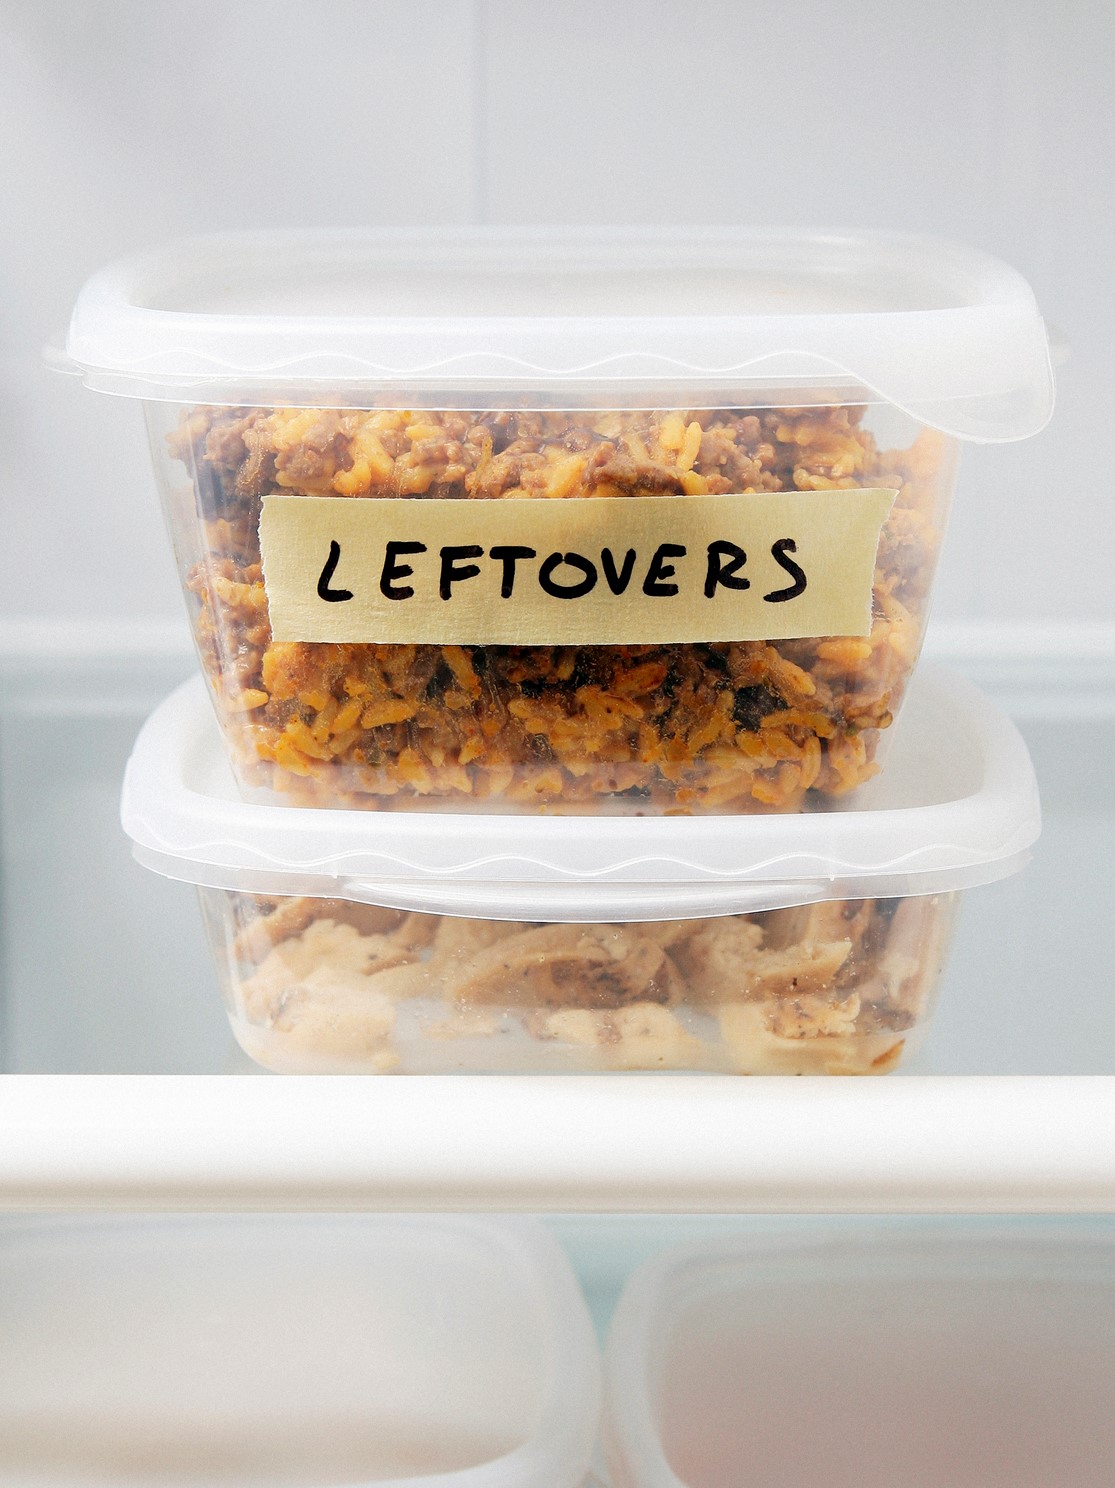 Tupperware container in fridge labeled "leftovers"